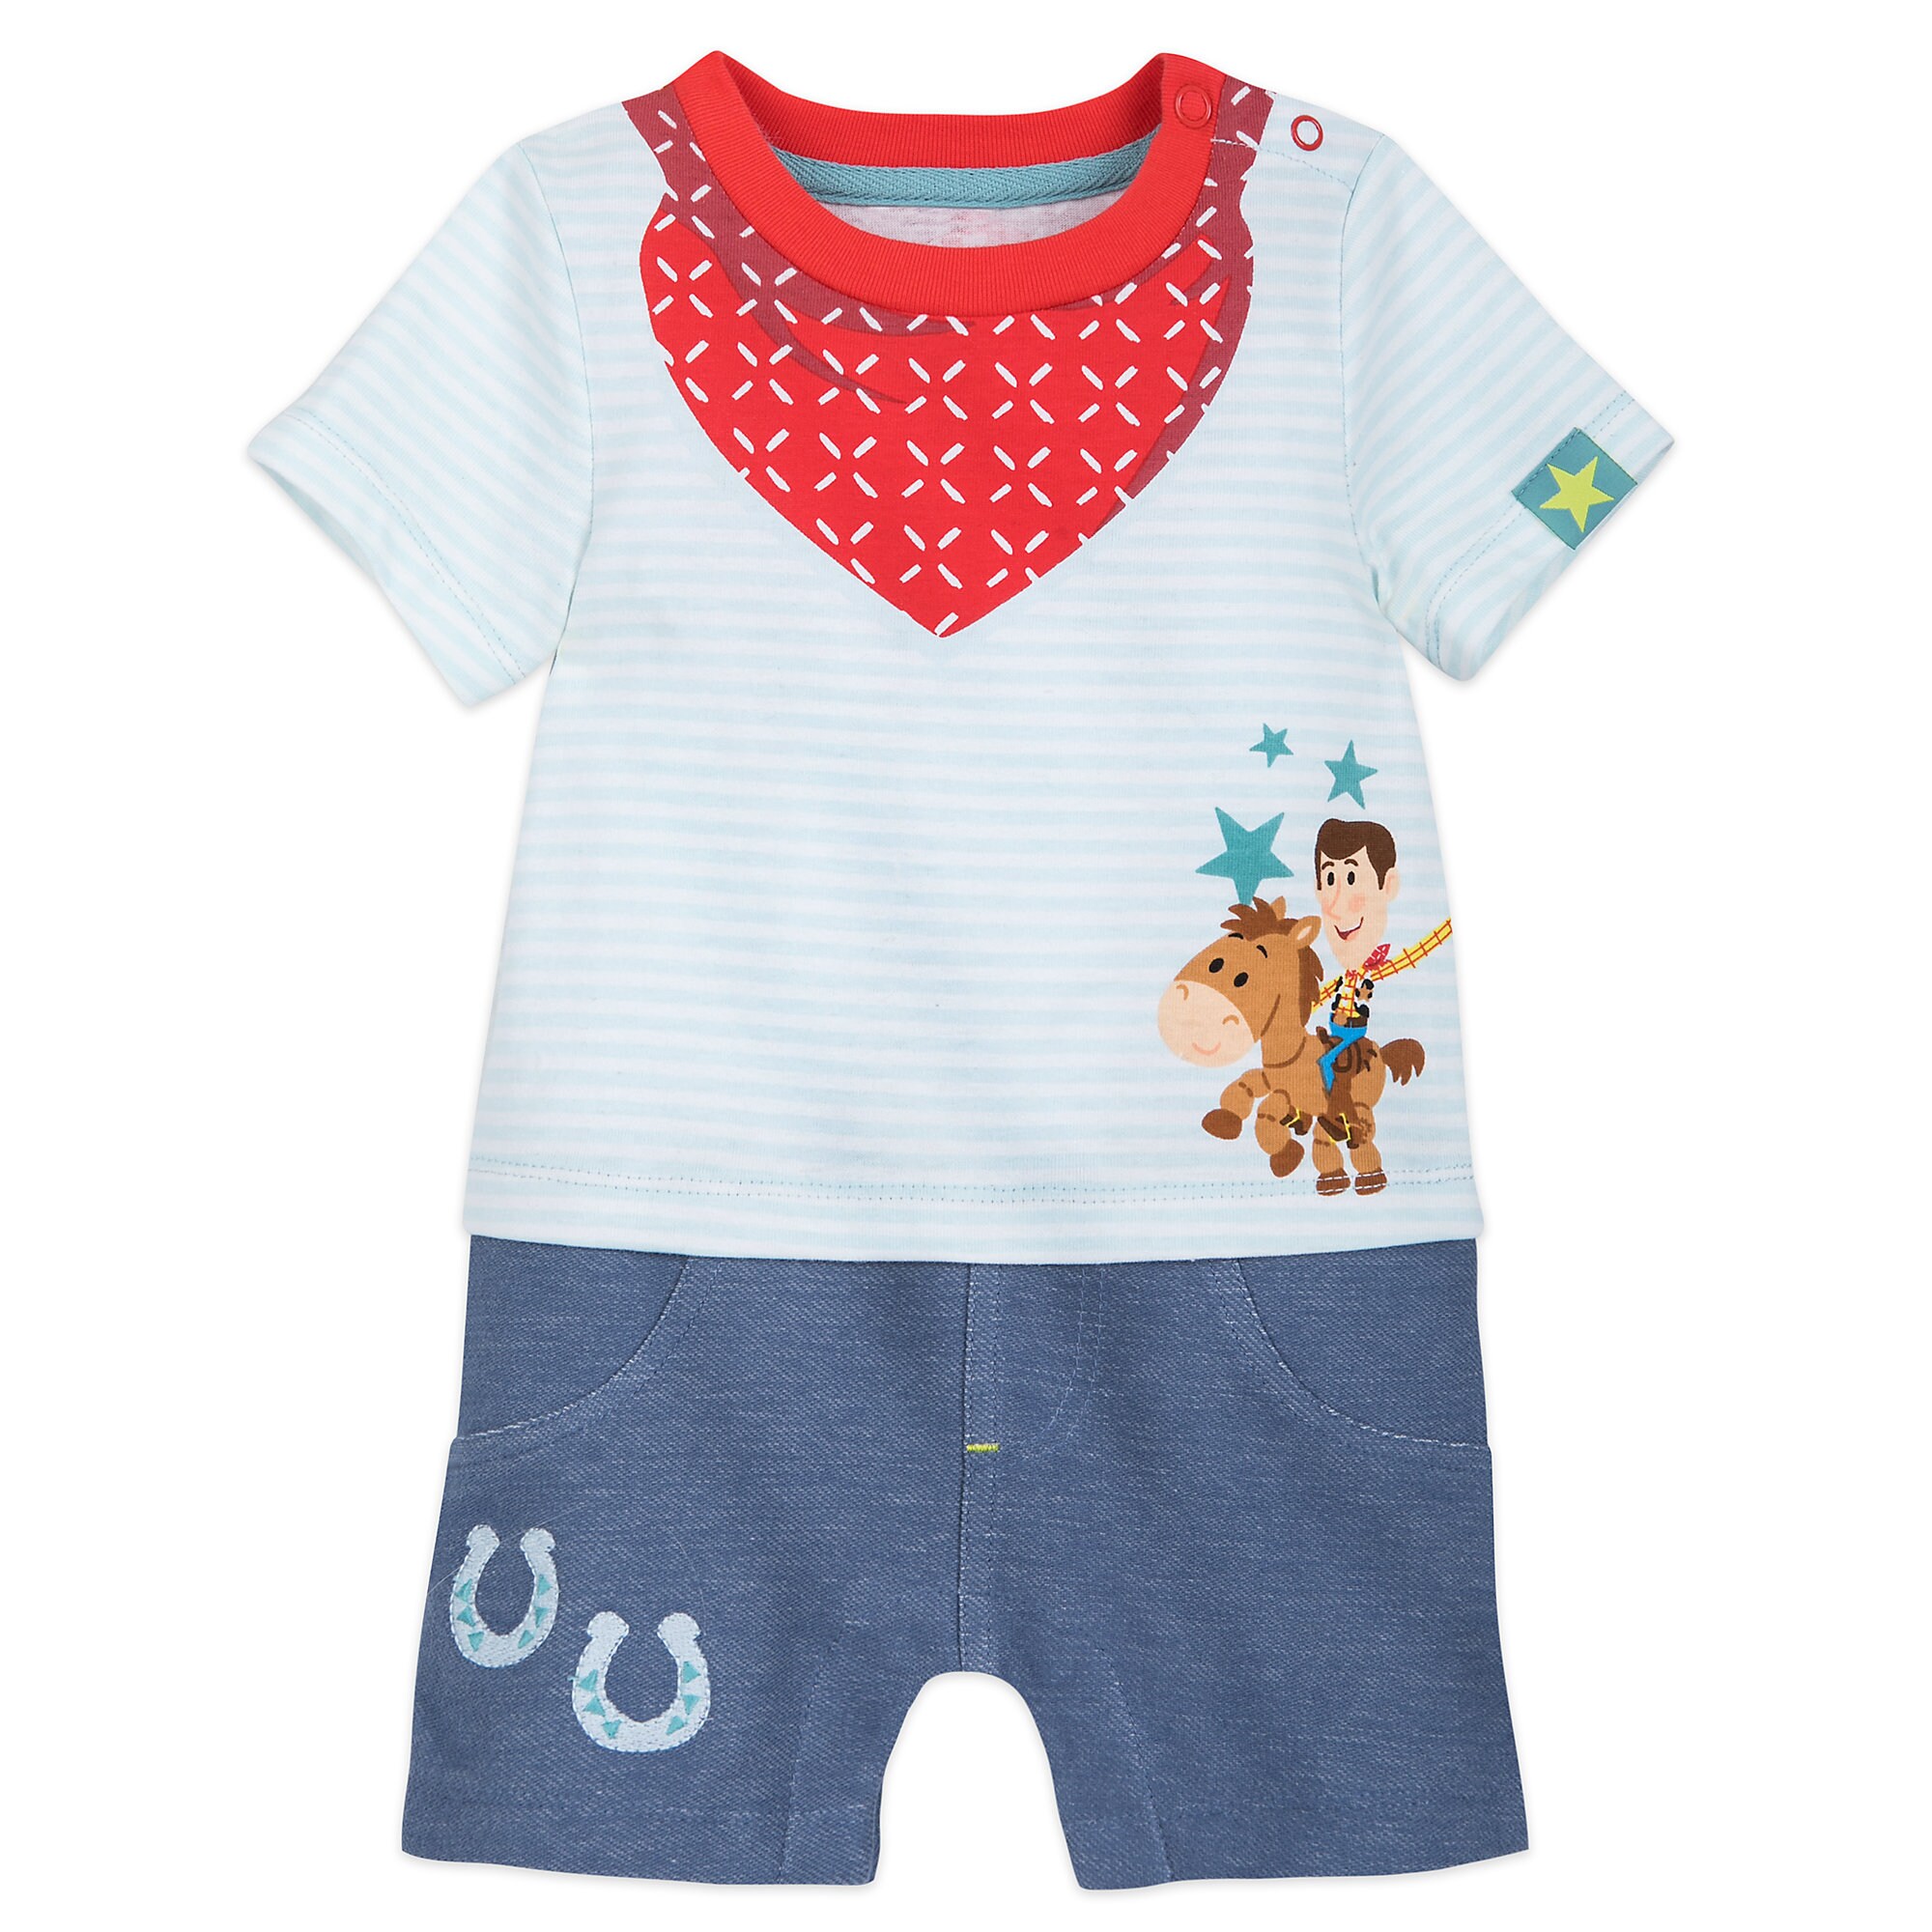 Toy Story Romper for Baby